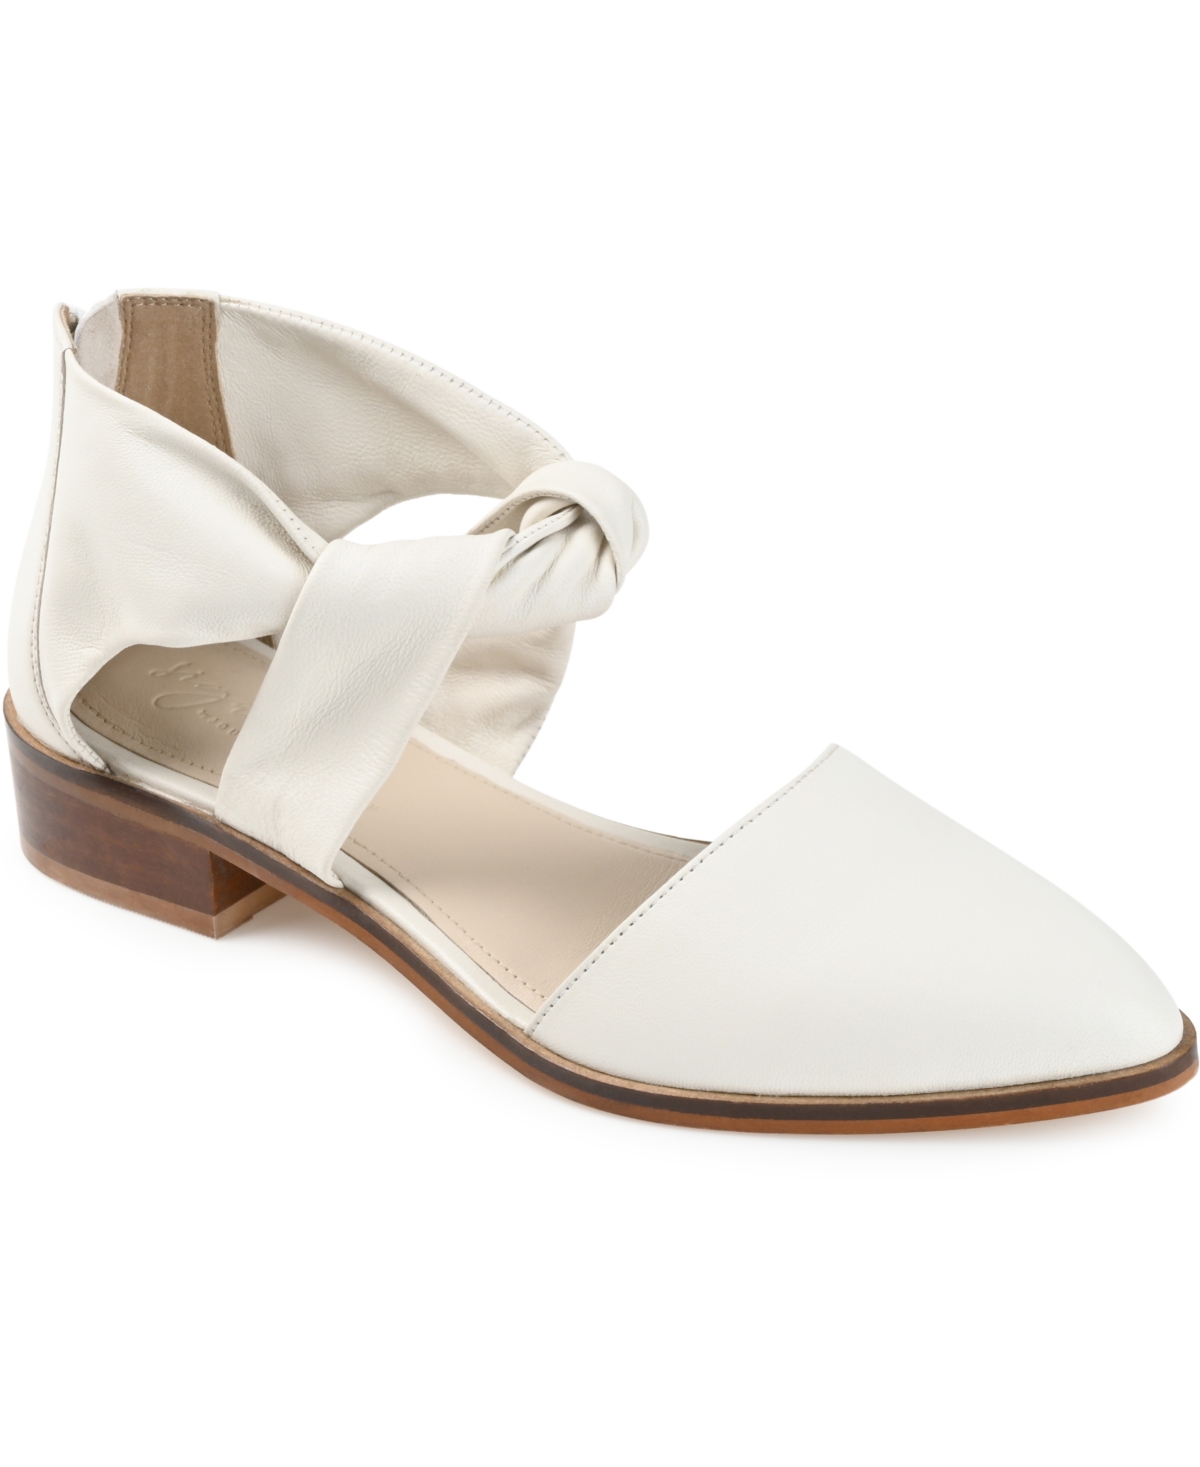 Women's Tayler Twisted Ankle Strap Flats - Ivory